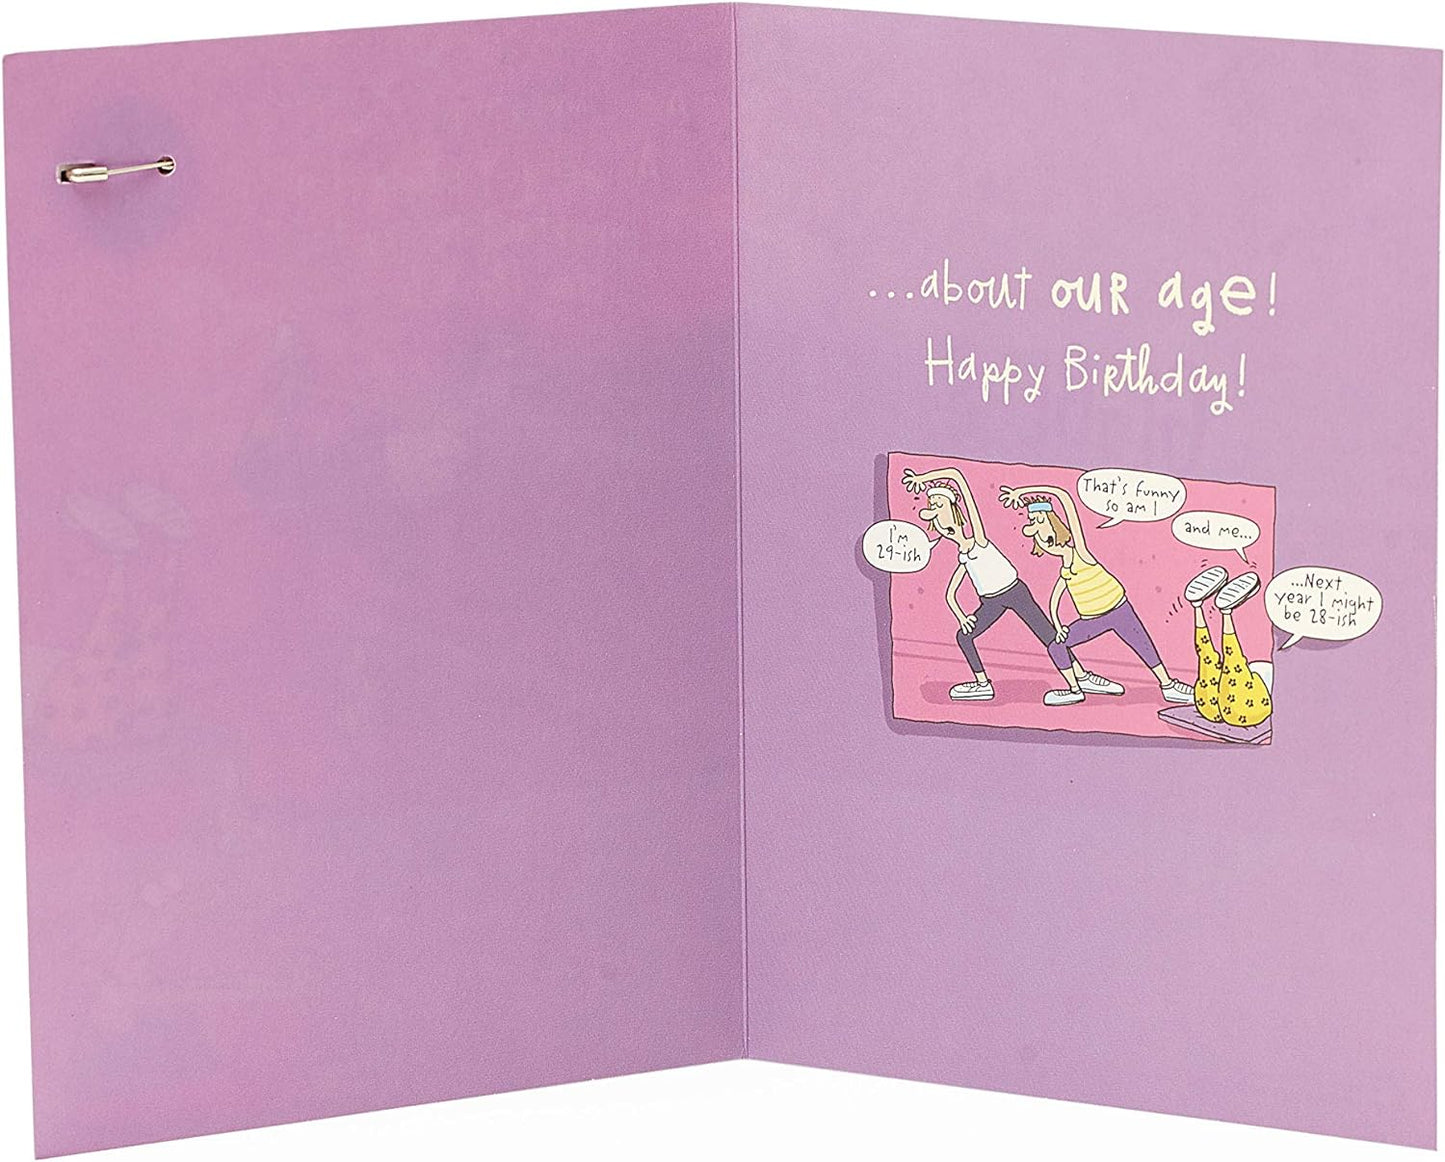 Yoga Design Birthday Card For Her with Badge